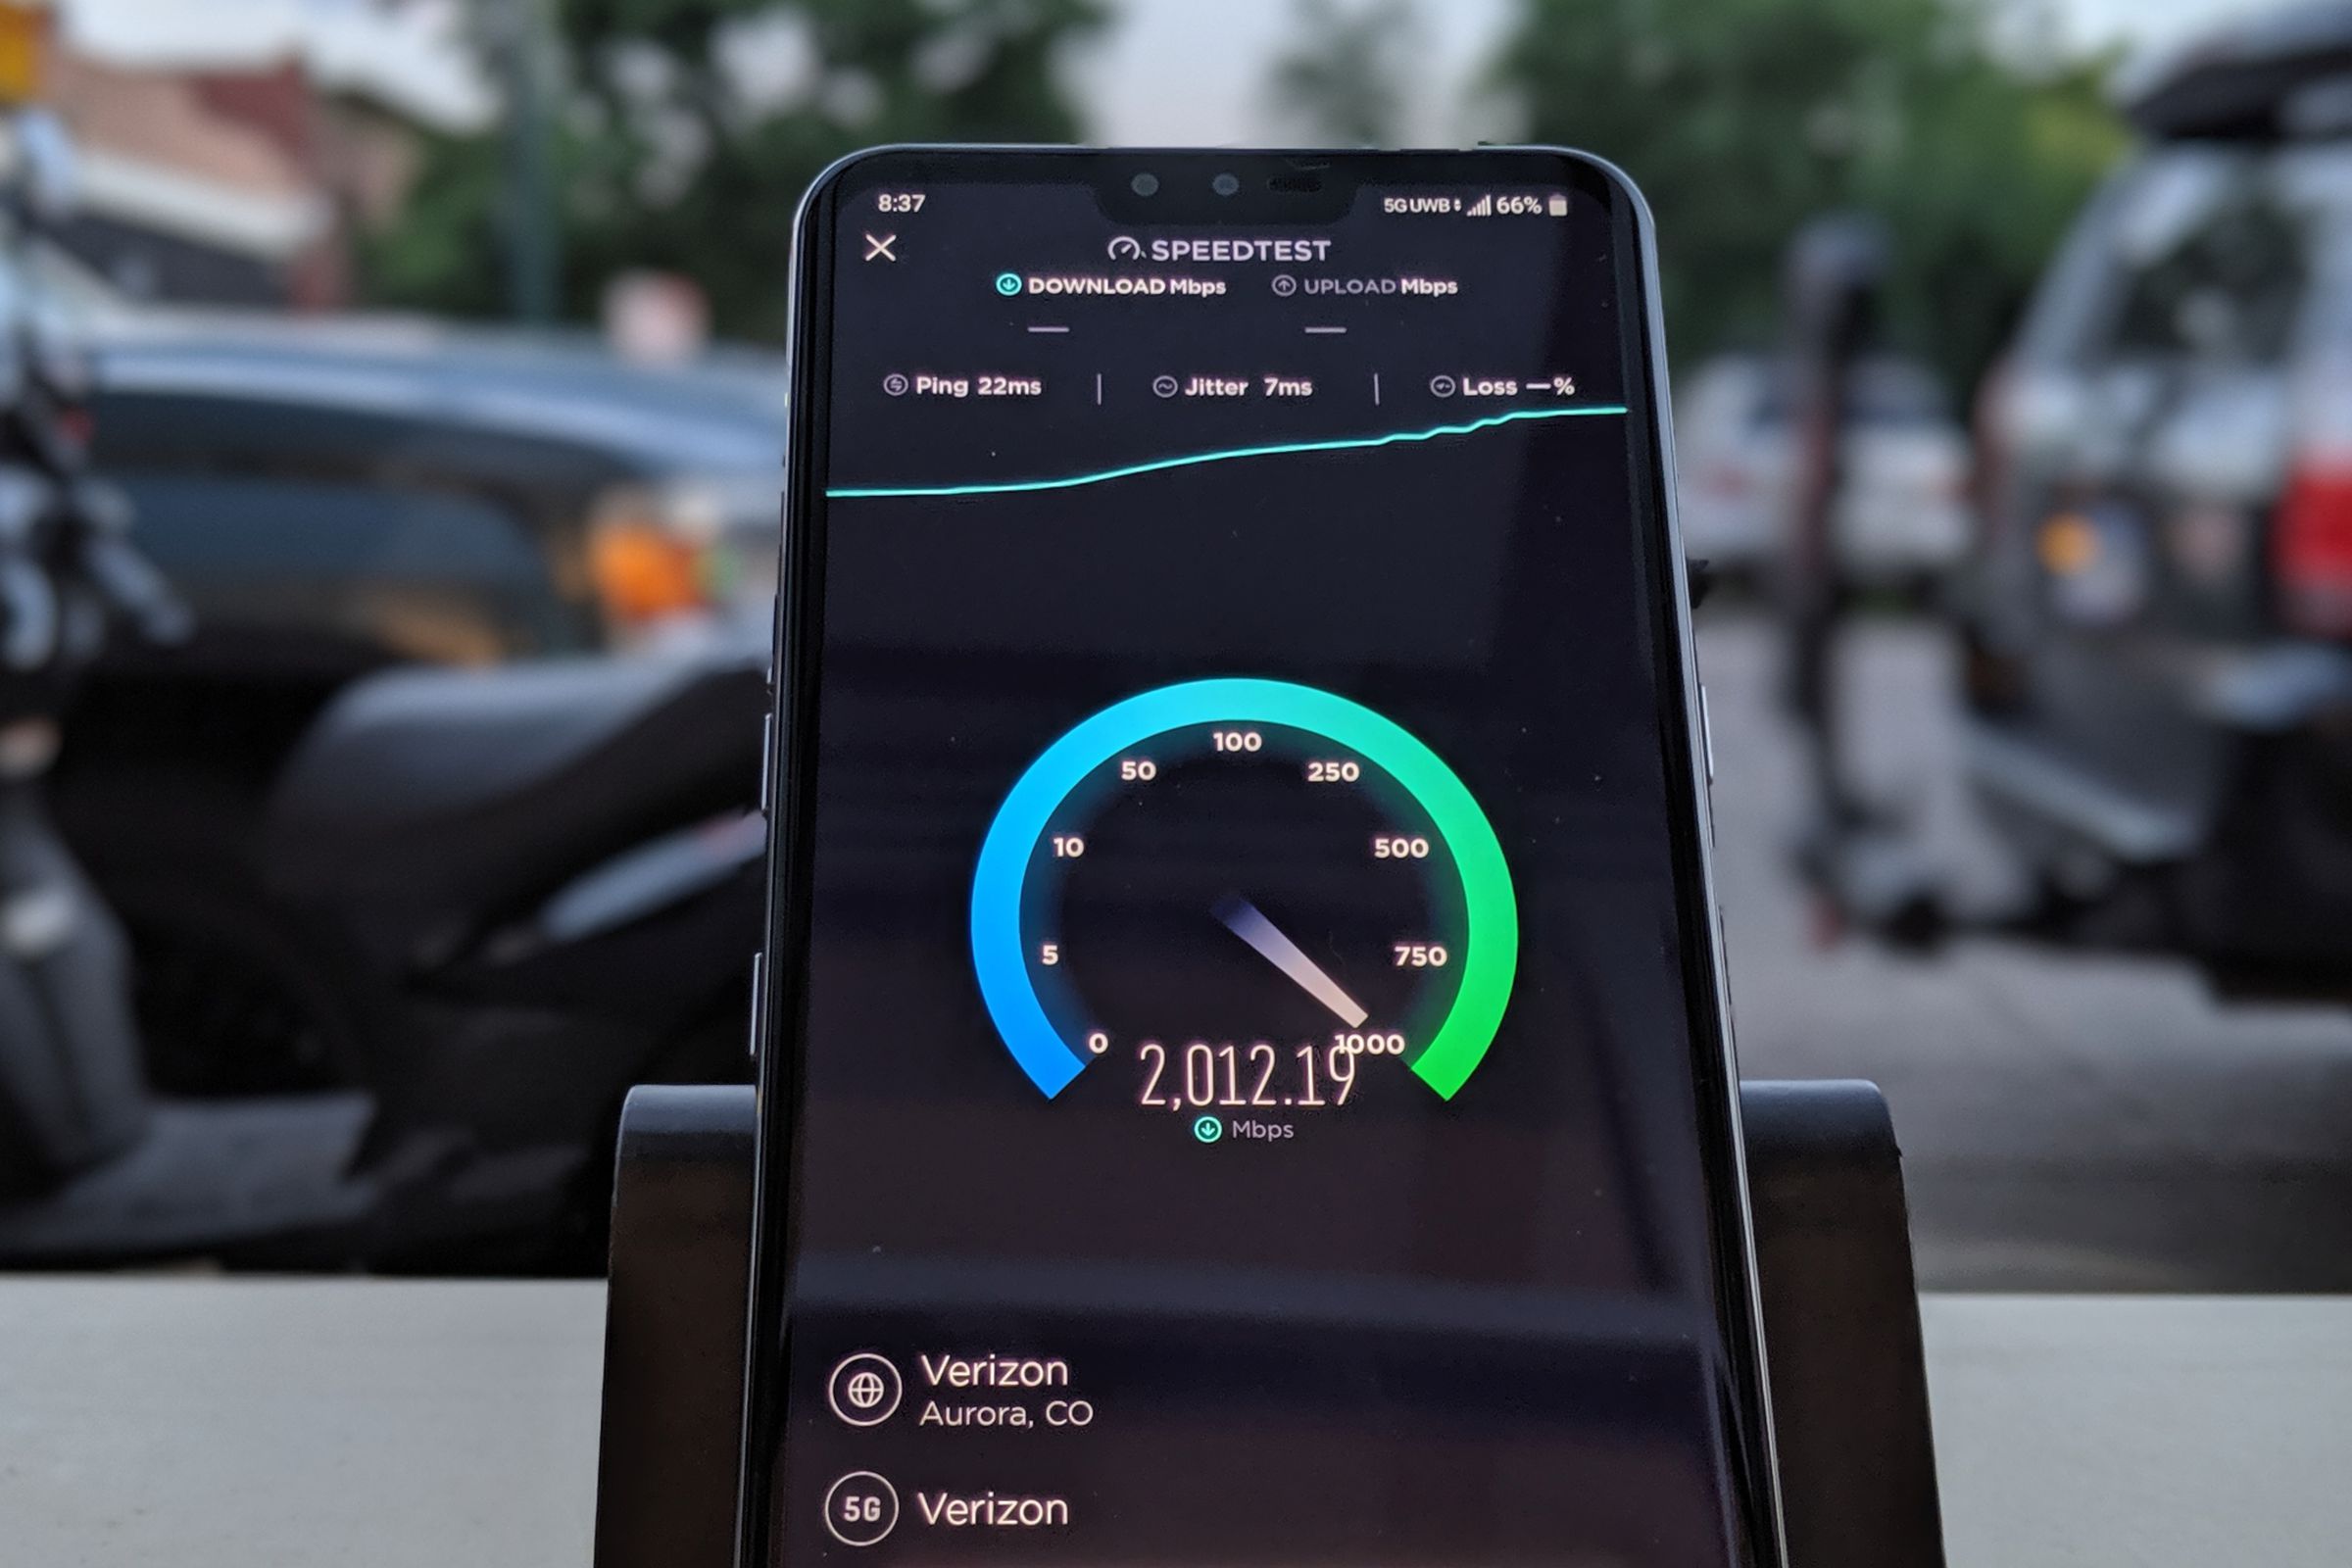 A speed test conducted on an LG V50 ThinQ by a Verizon employee in Aurora, Colorado